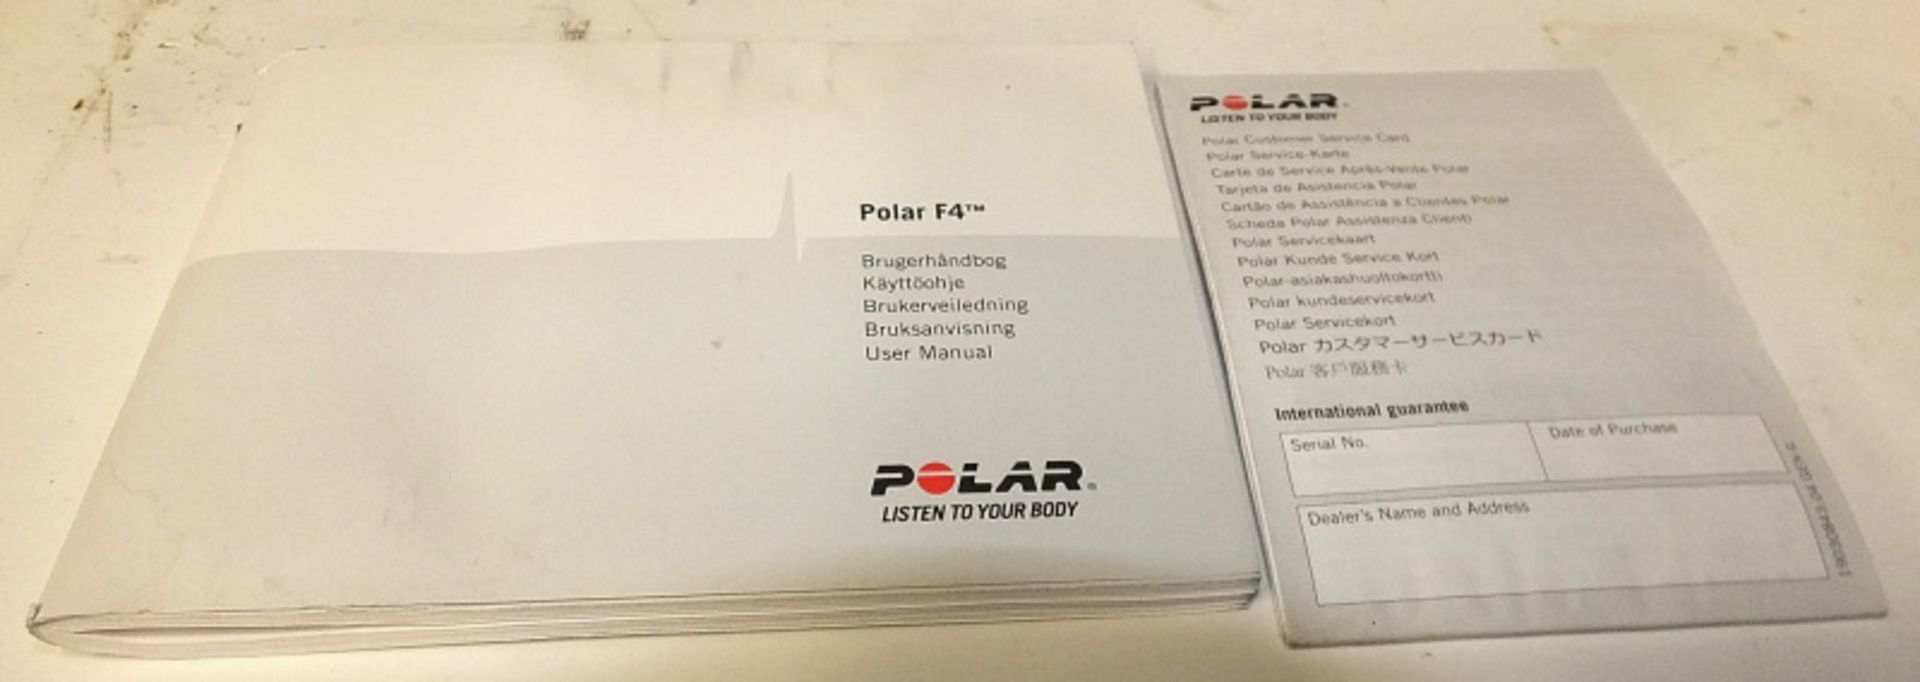 2x Polar F4 Fitness Heart Rate Monitors with Polar Heart Rate Chest Sensors - Image 5 of 5